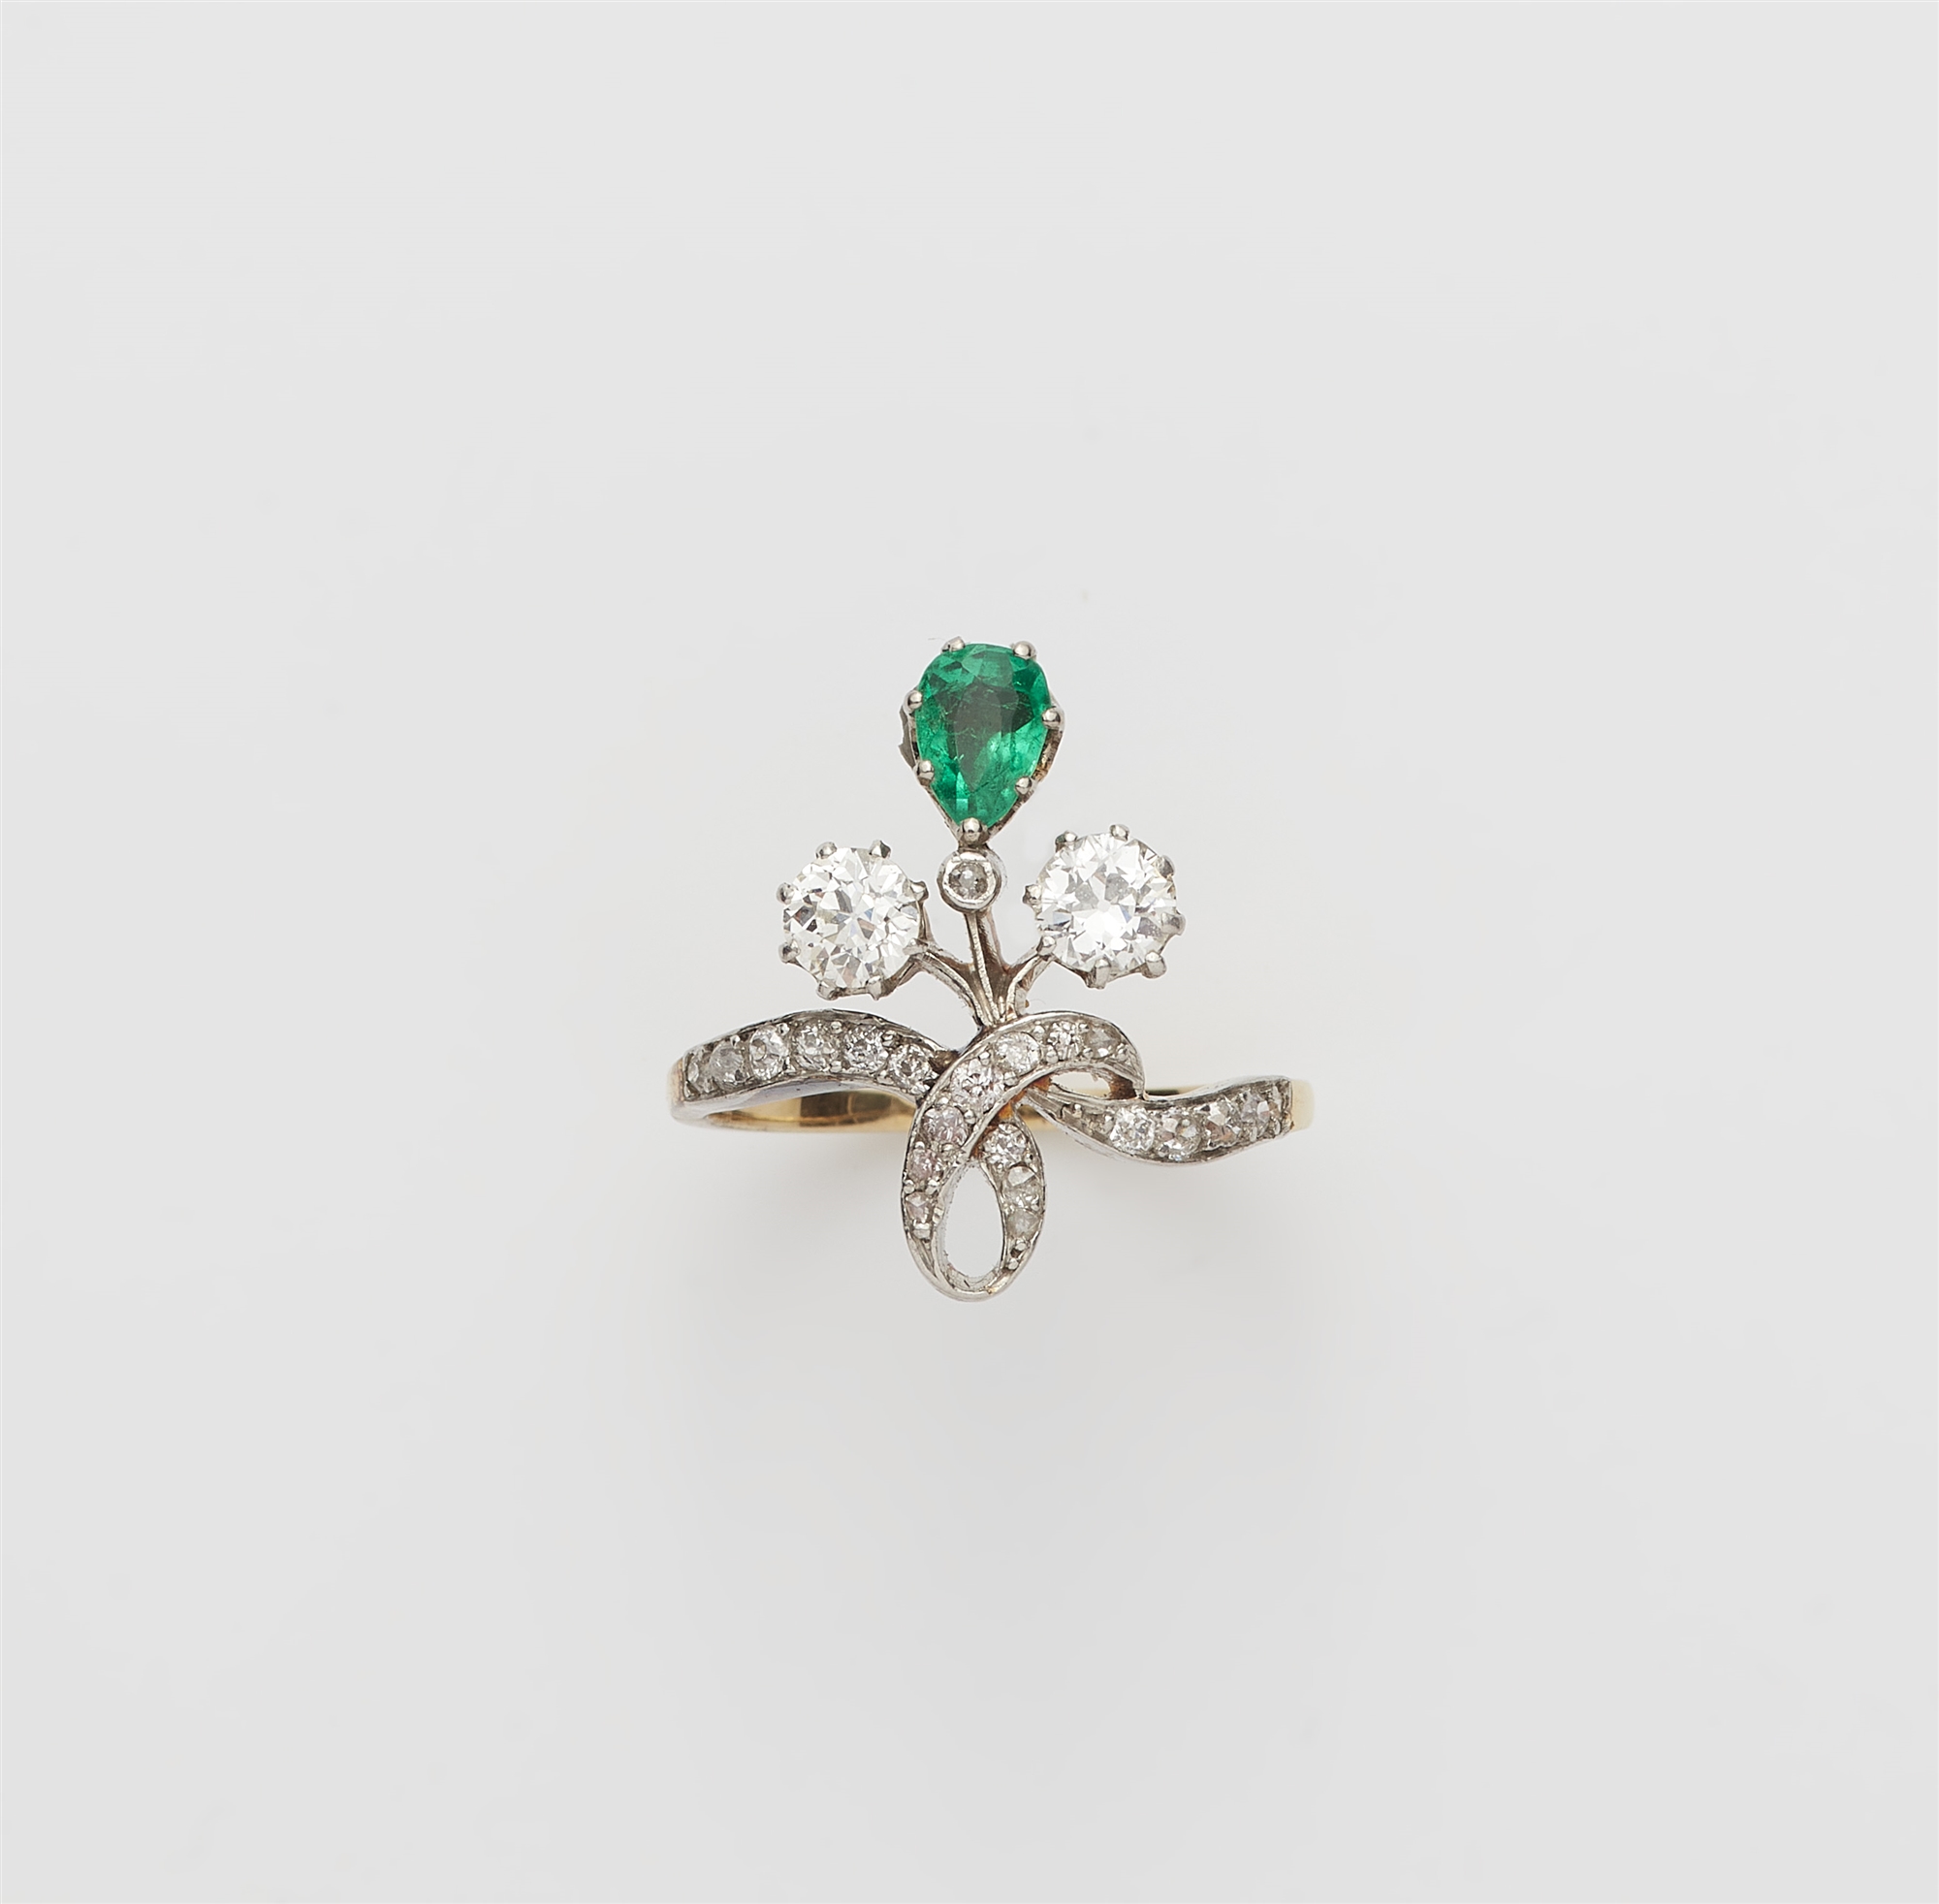 A Belle Epoque 18k gold diamond and emerald ring.